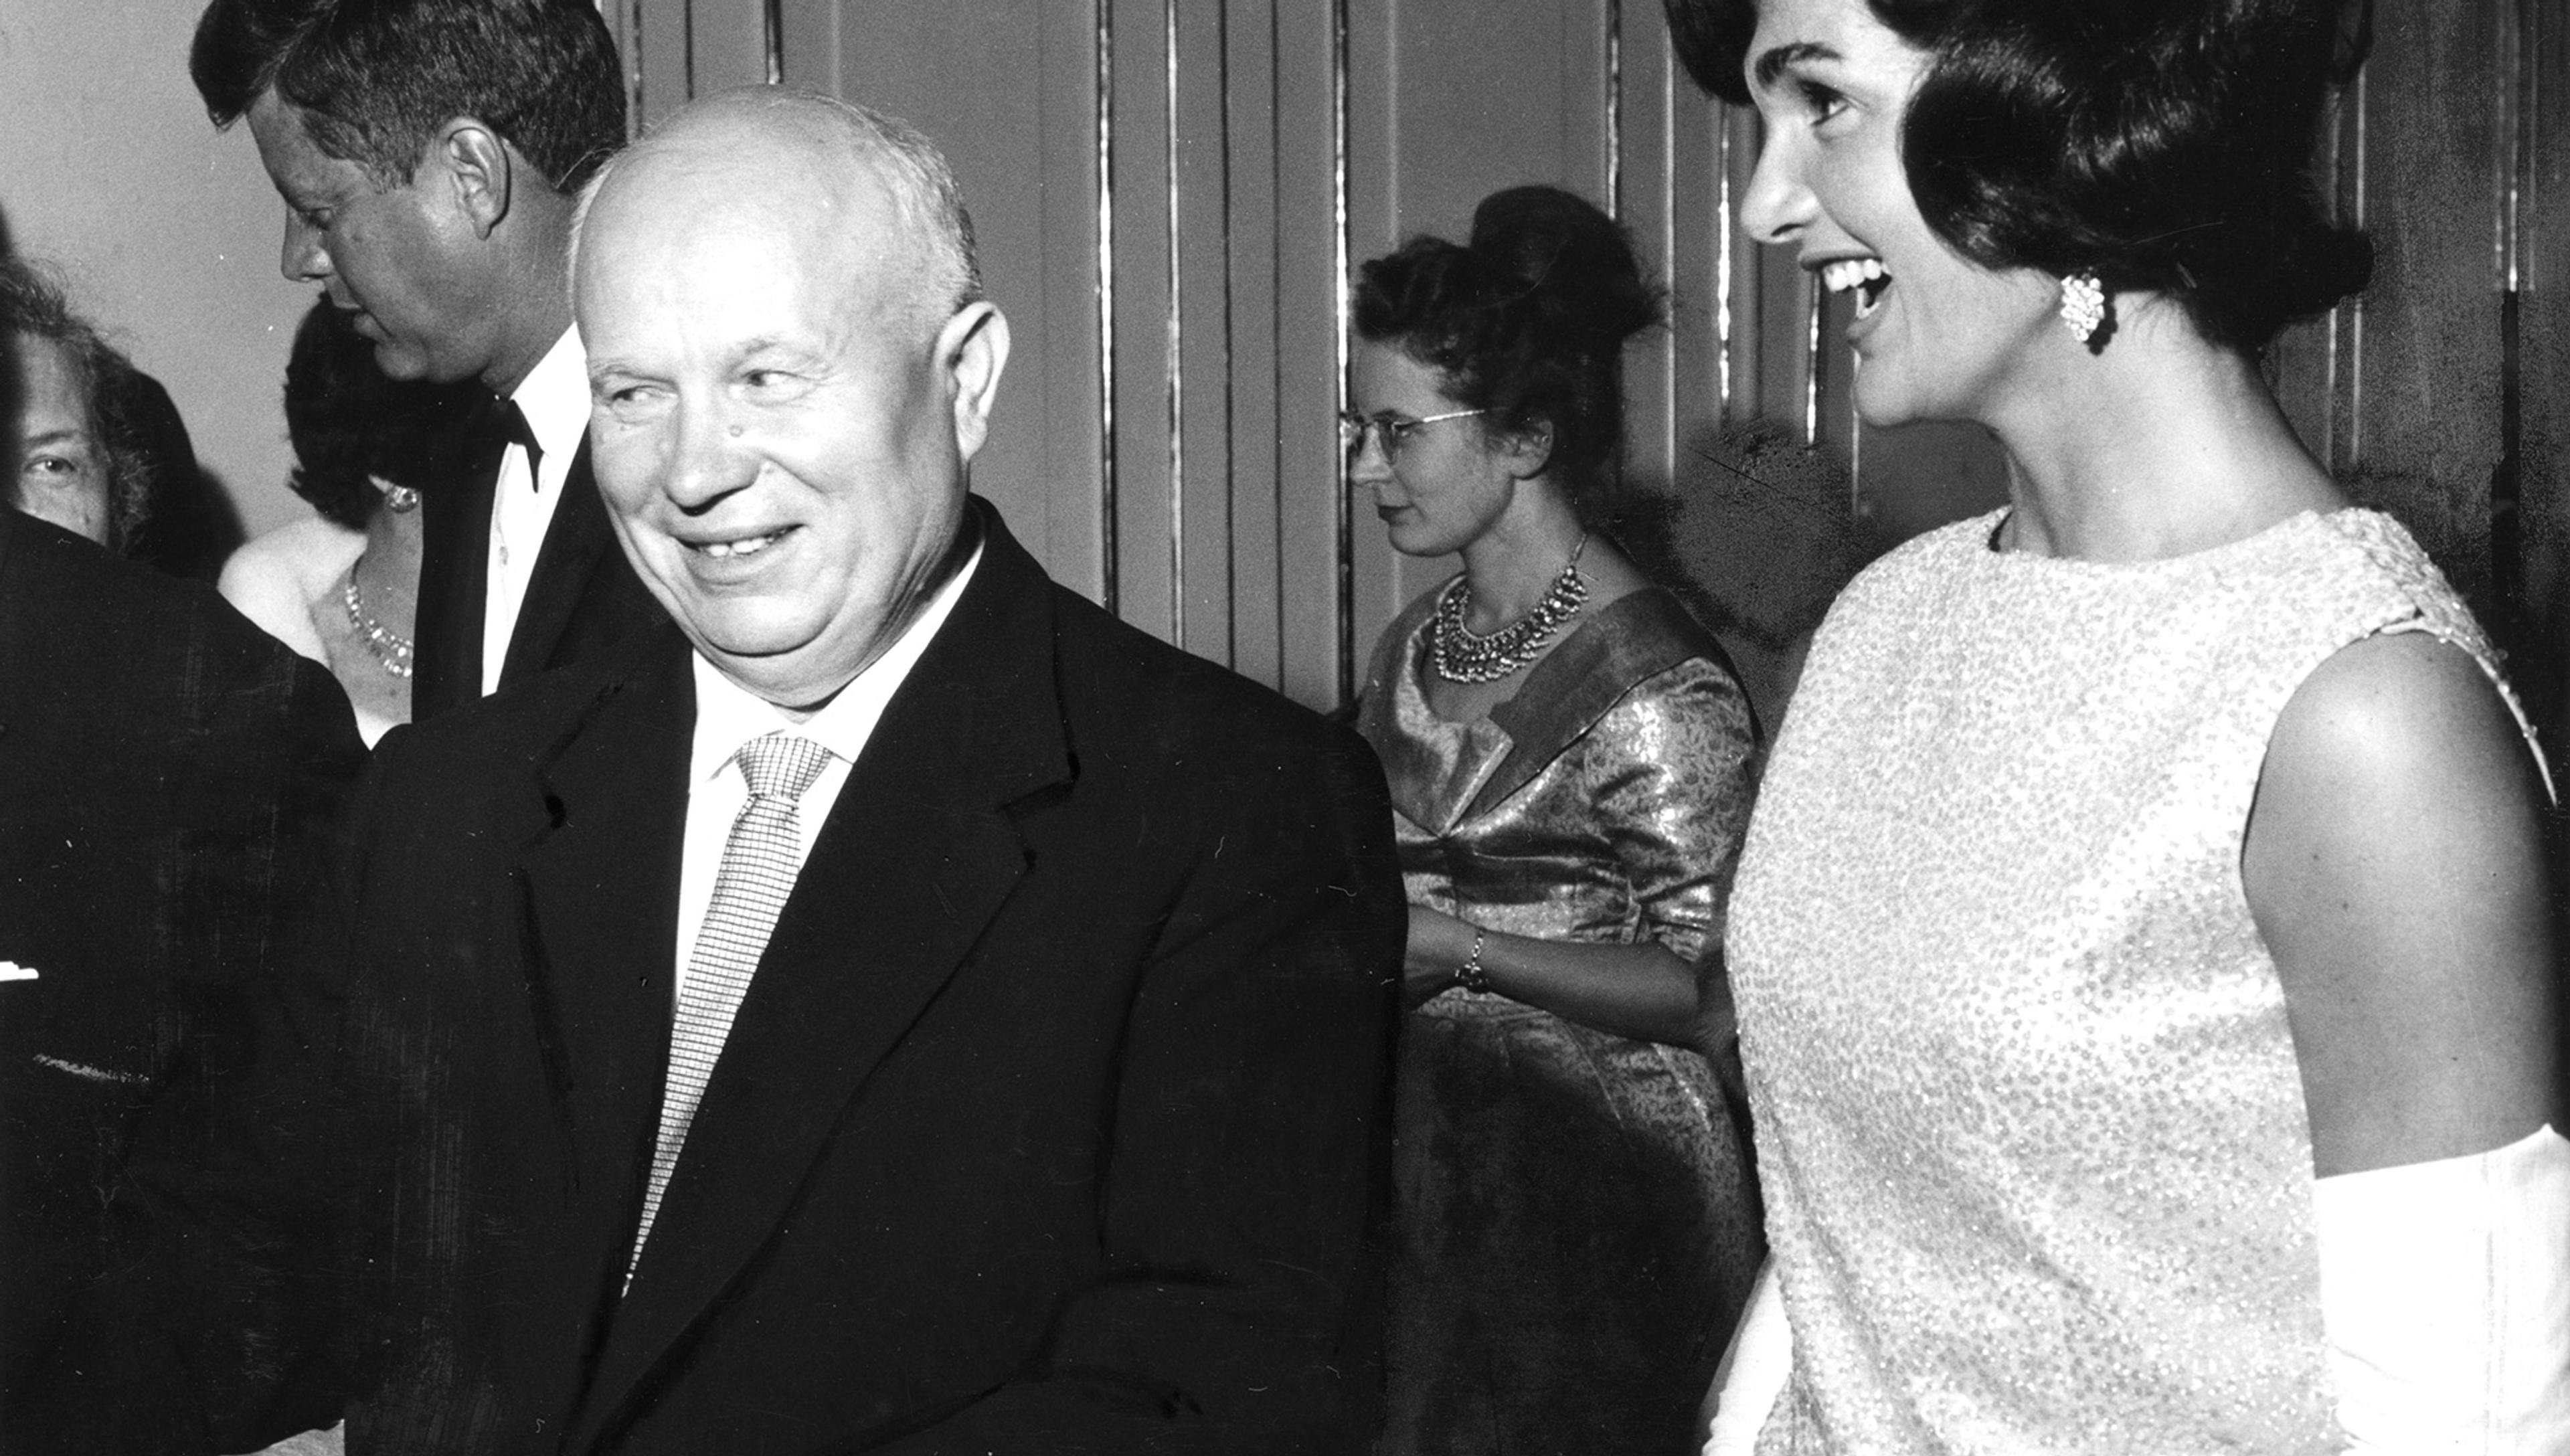 A black-and-white photo of a man in a suit and tie smiling while a woman in a glittery dress and gloves laughs beside him. They are at a social gathering.